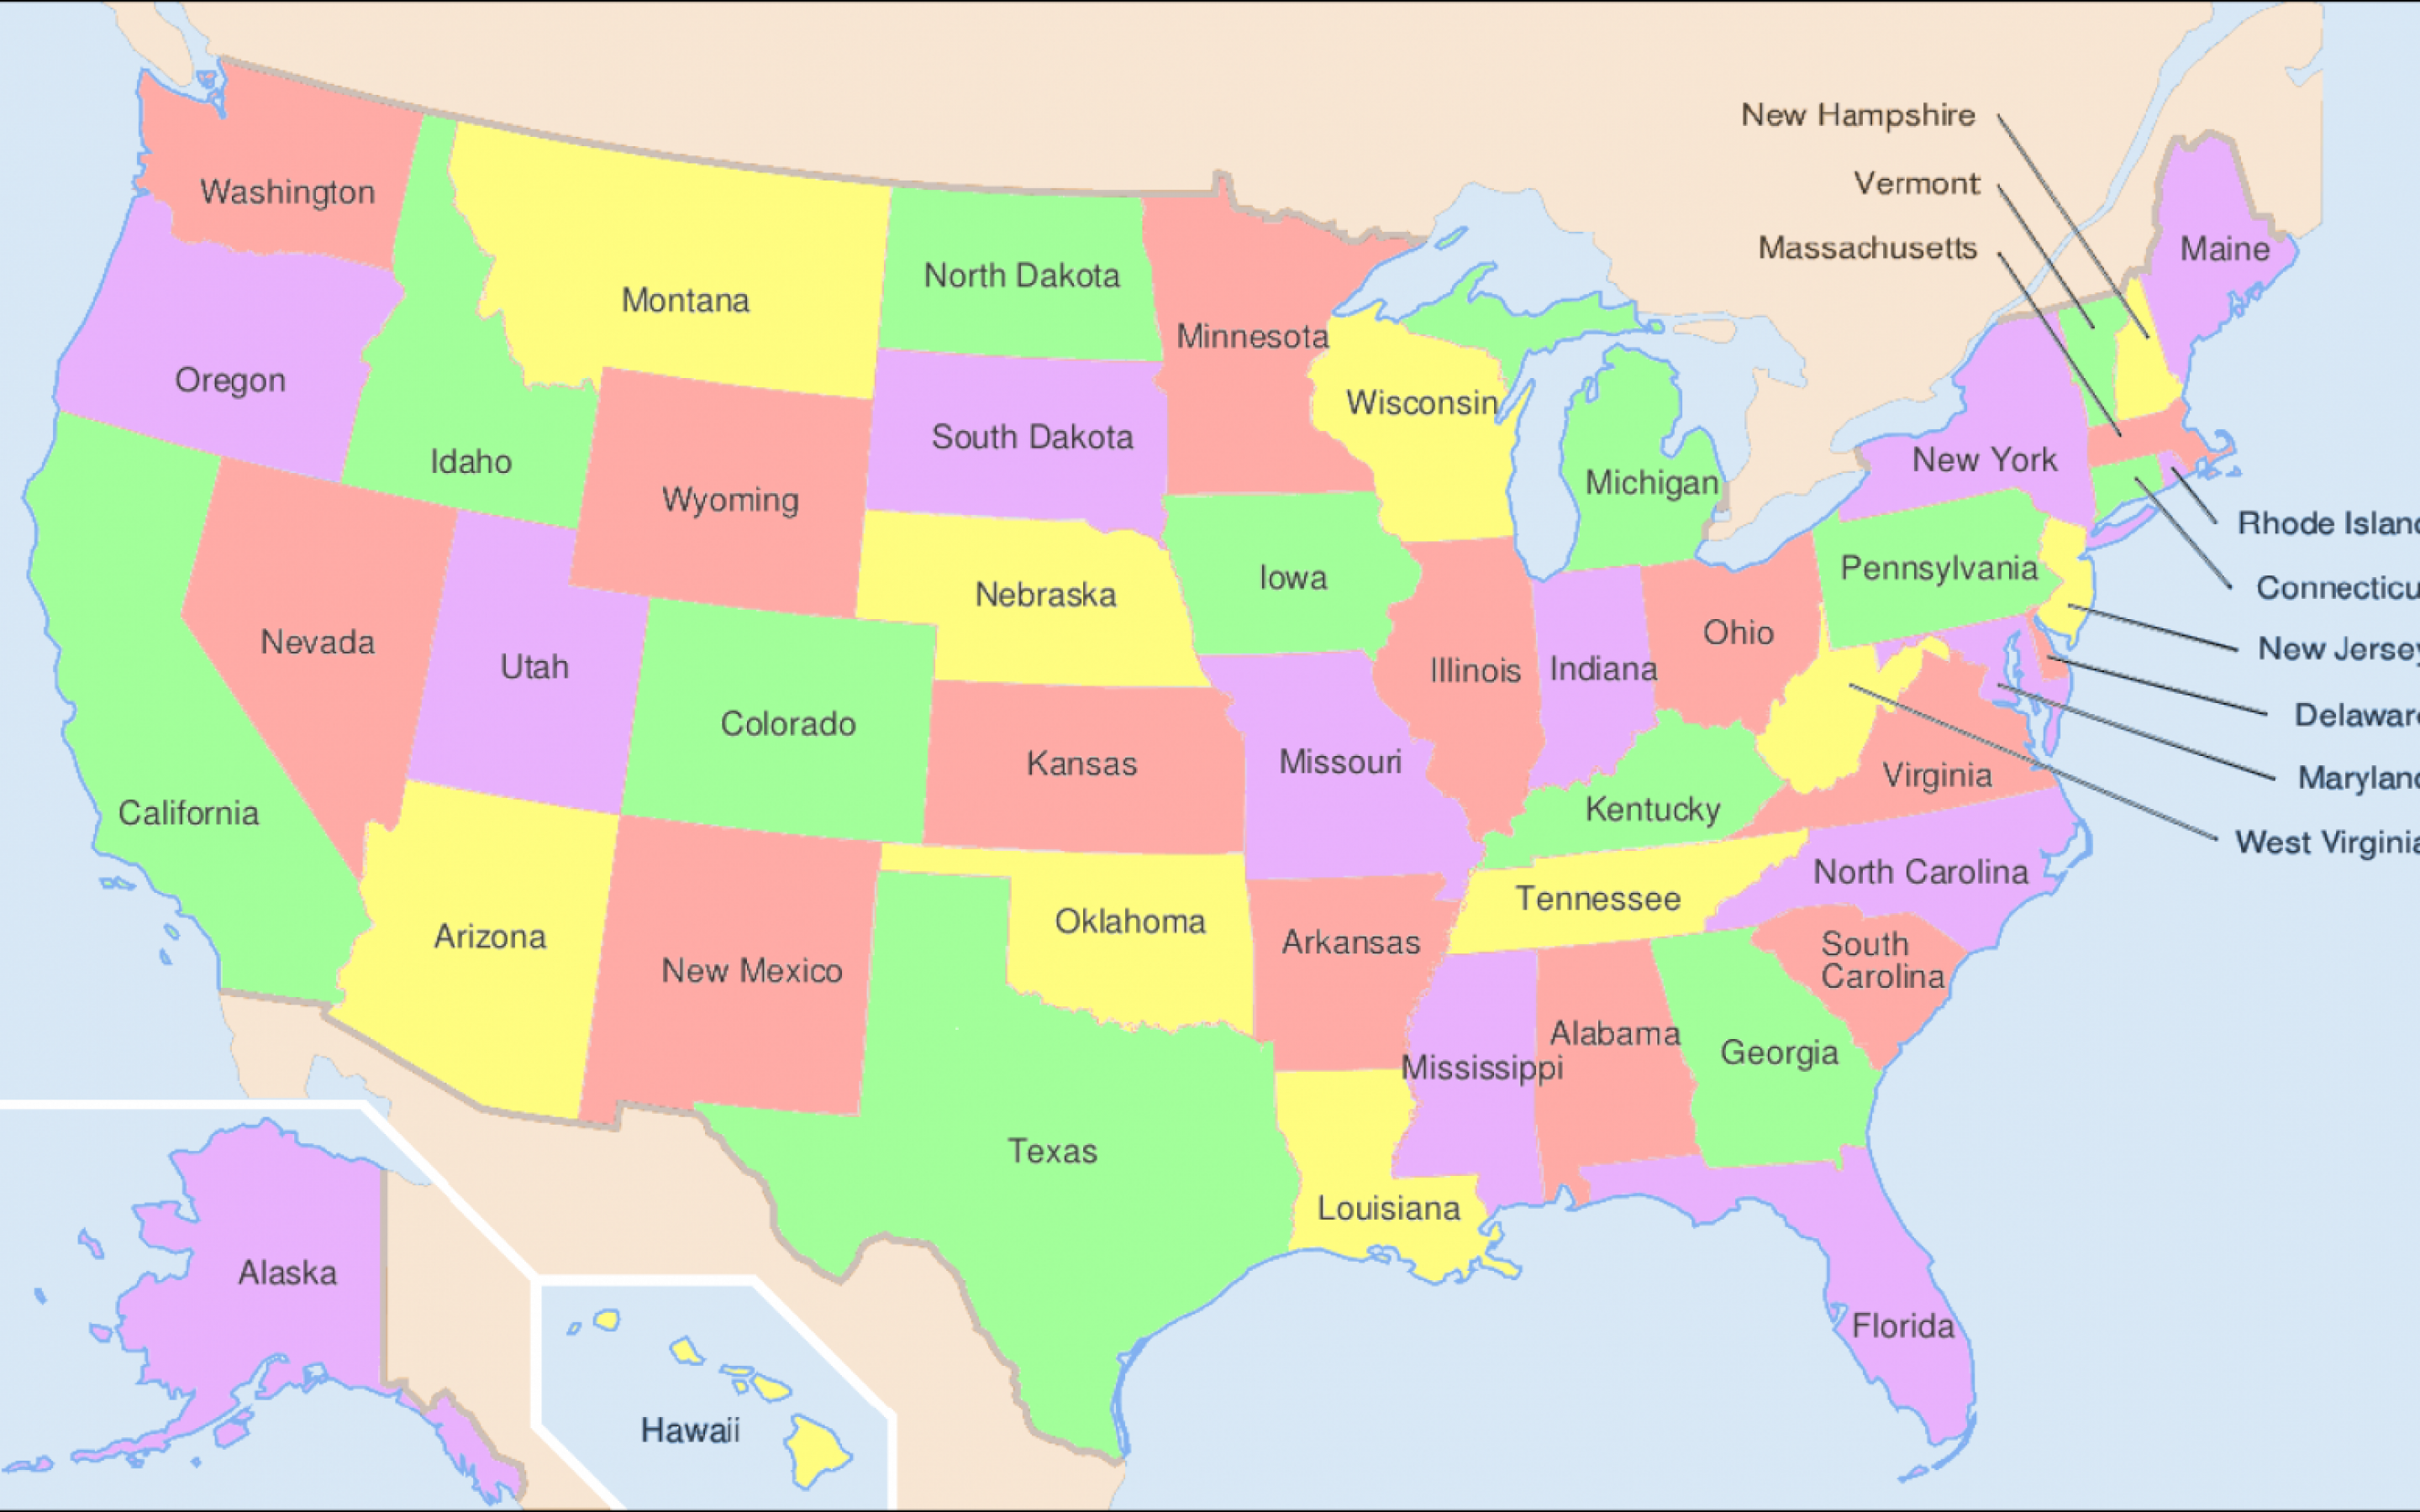 free-download-usa-map-united-states-pictures-4129577-with-resolutions